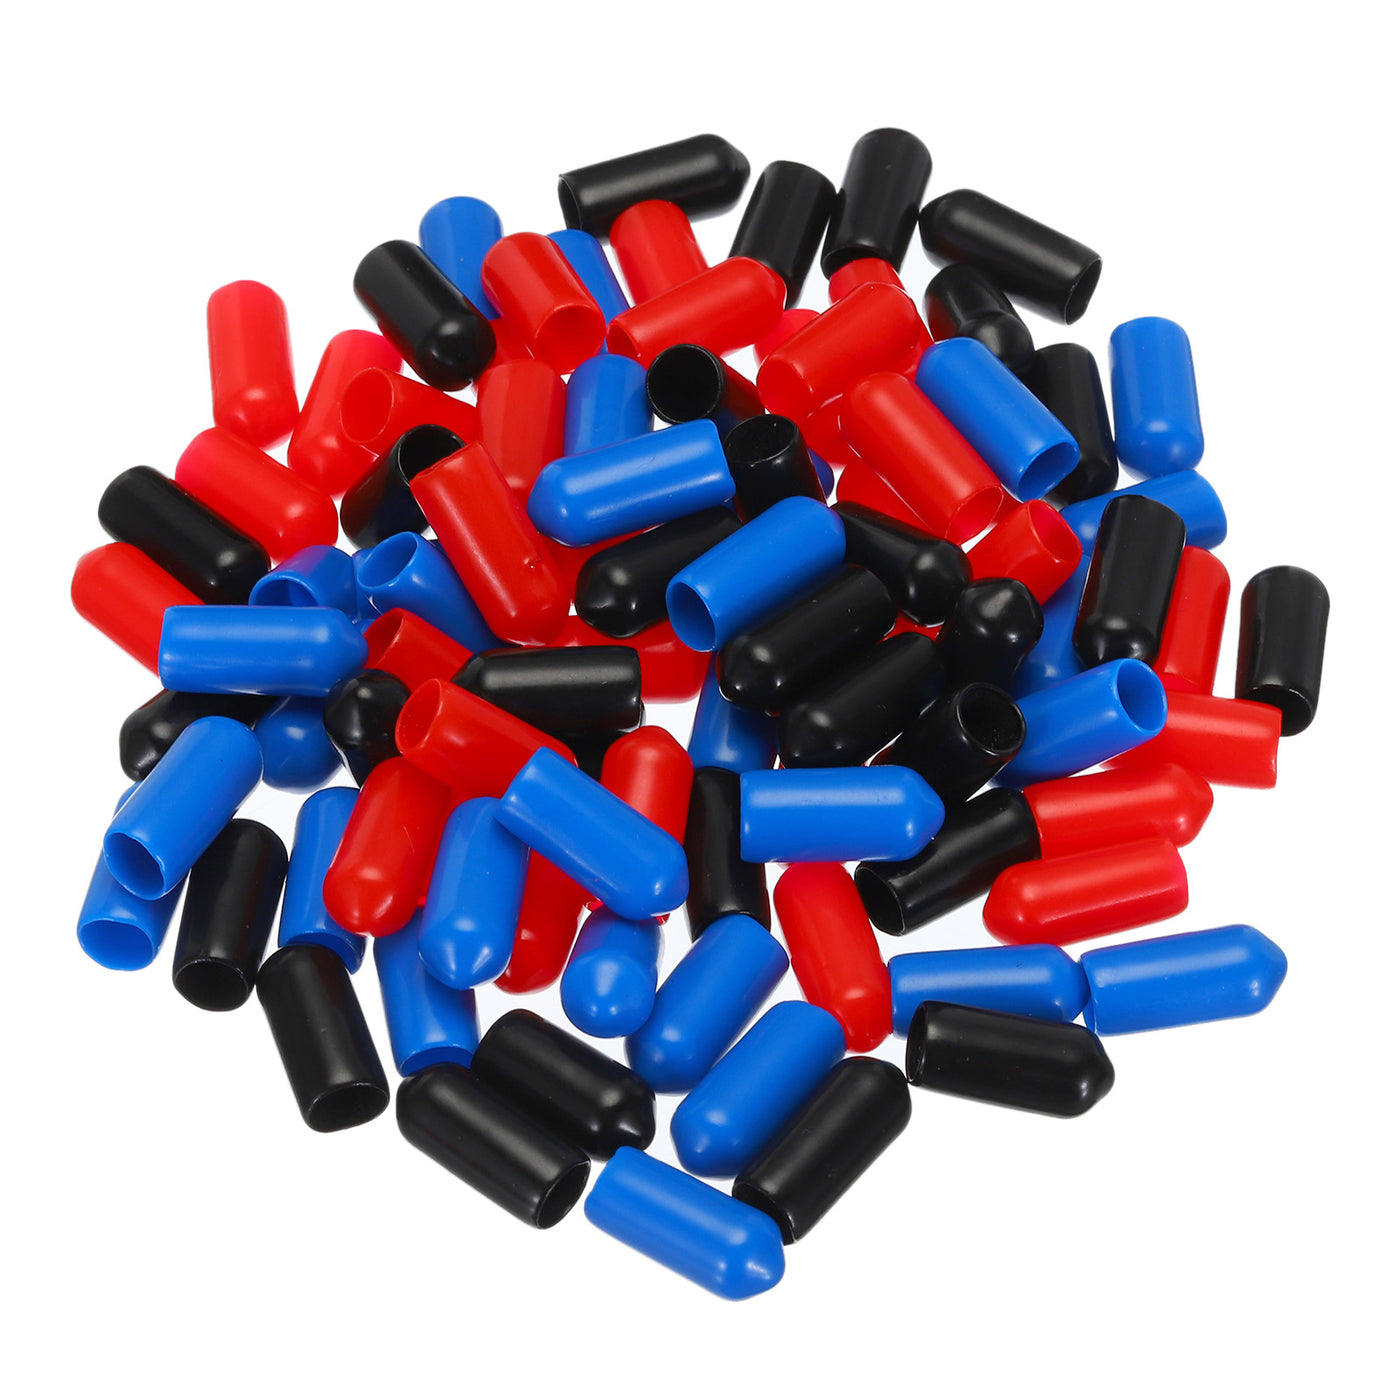 uxcell Uxcell 90pcs Rubber End Caps 6.5mm(1/4") ID Vinyl PVC Round Tube Bolt Cap Cover Screw Thread Protectors, Black Red Blue